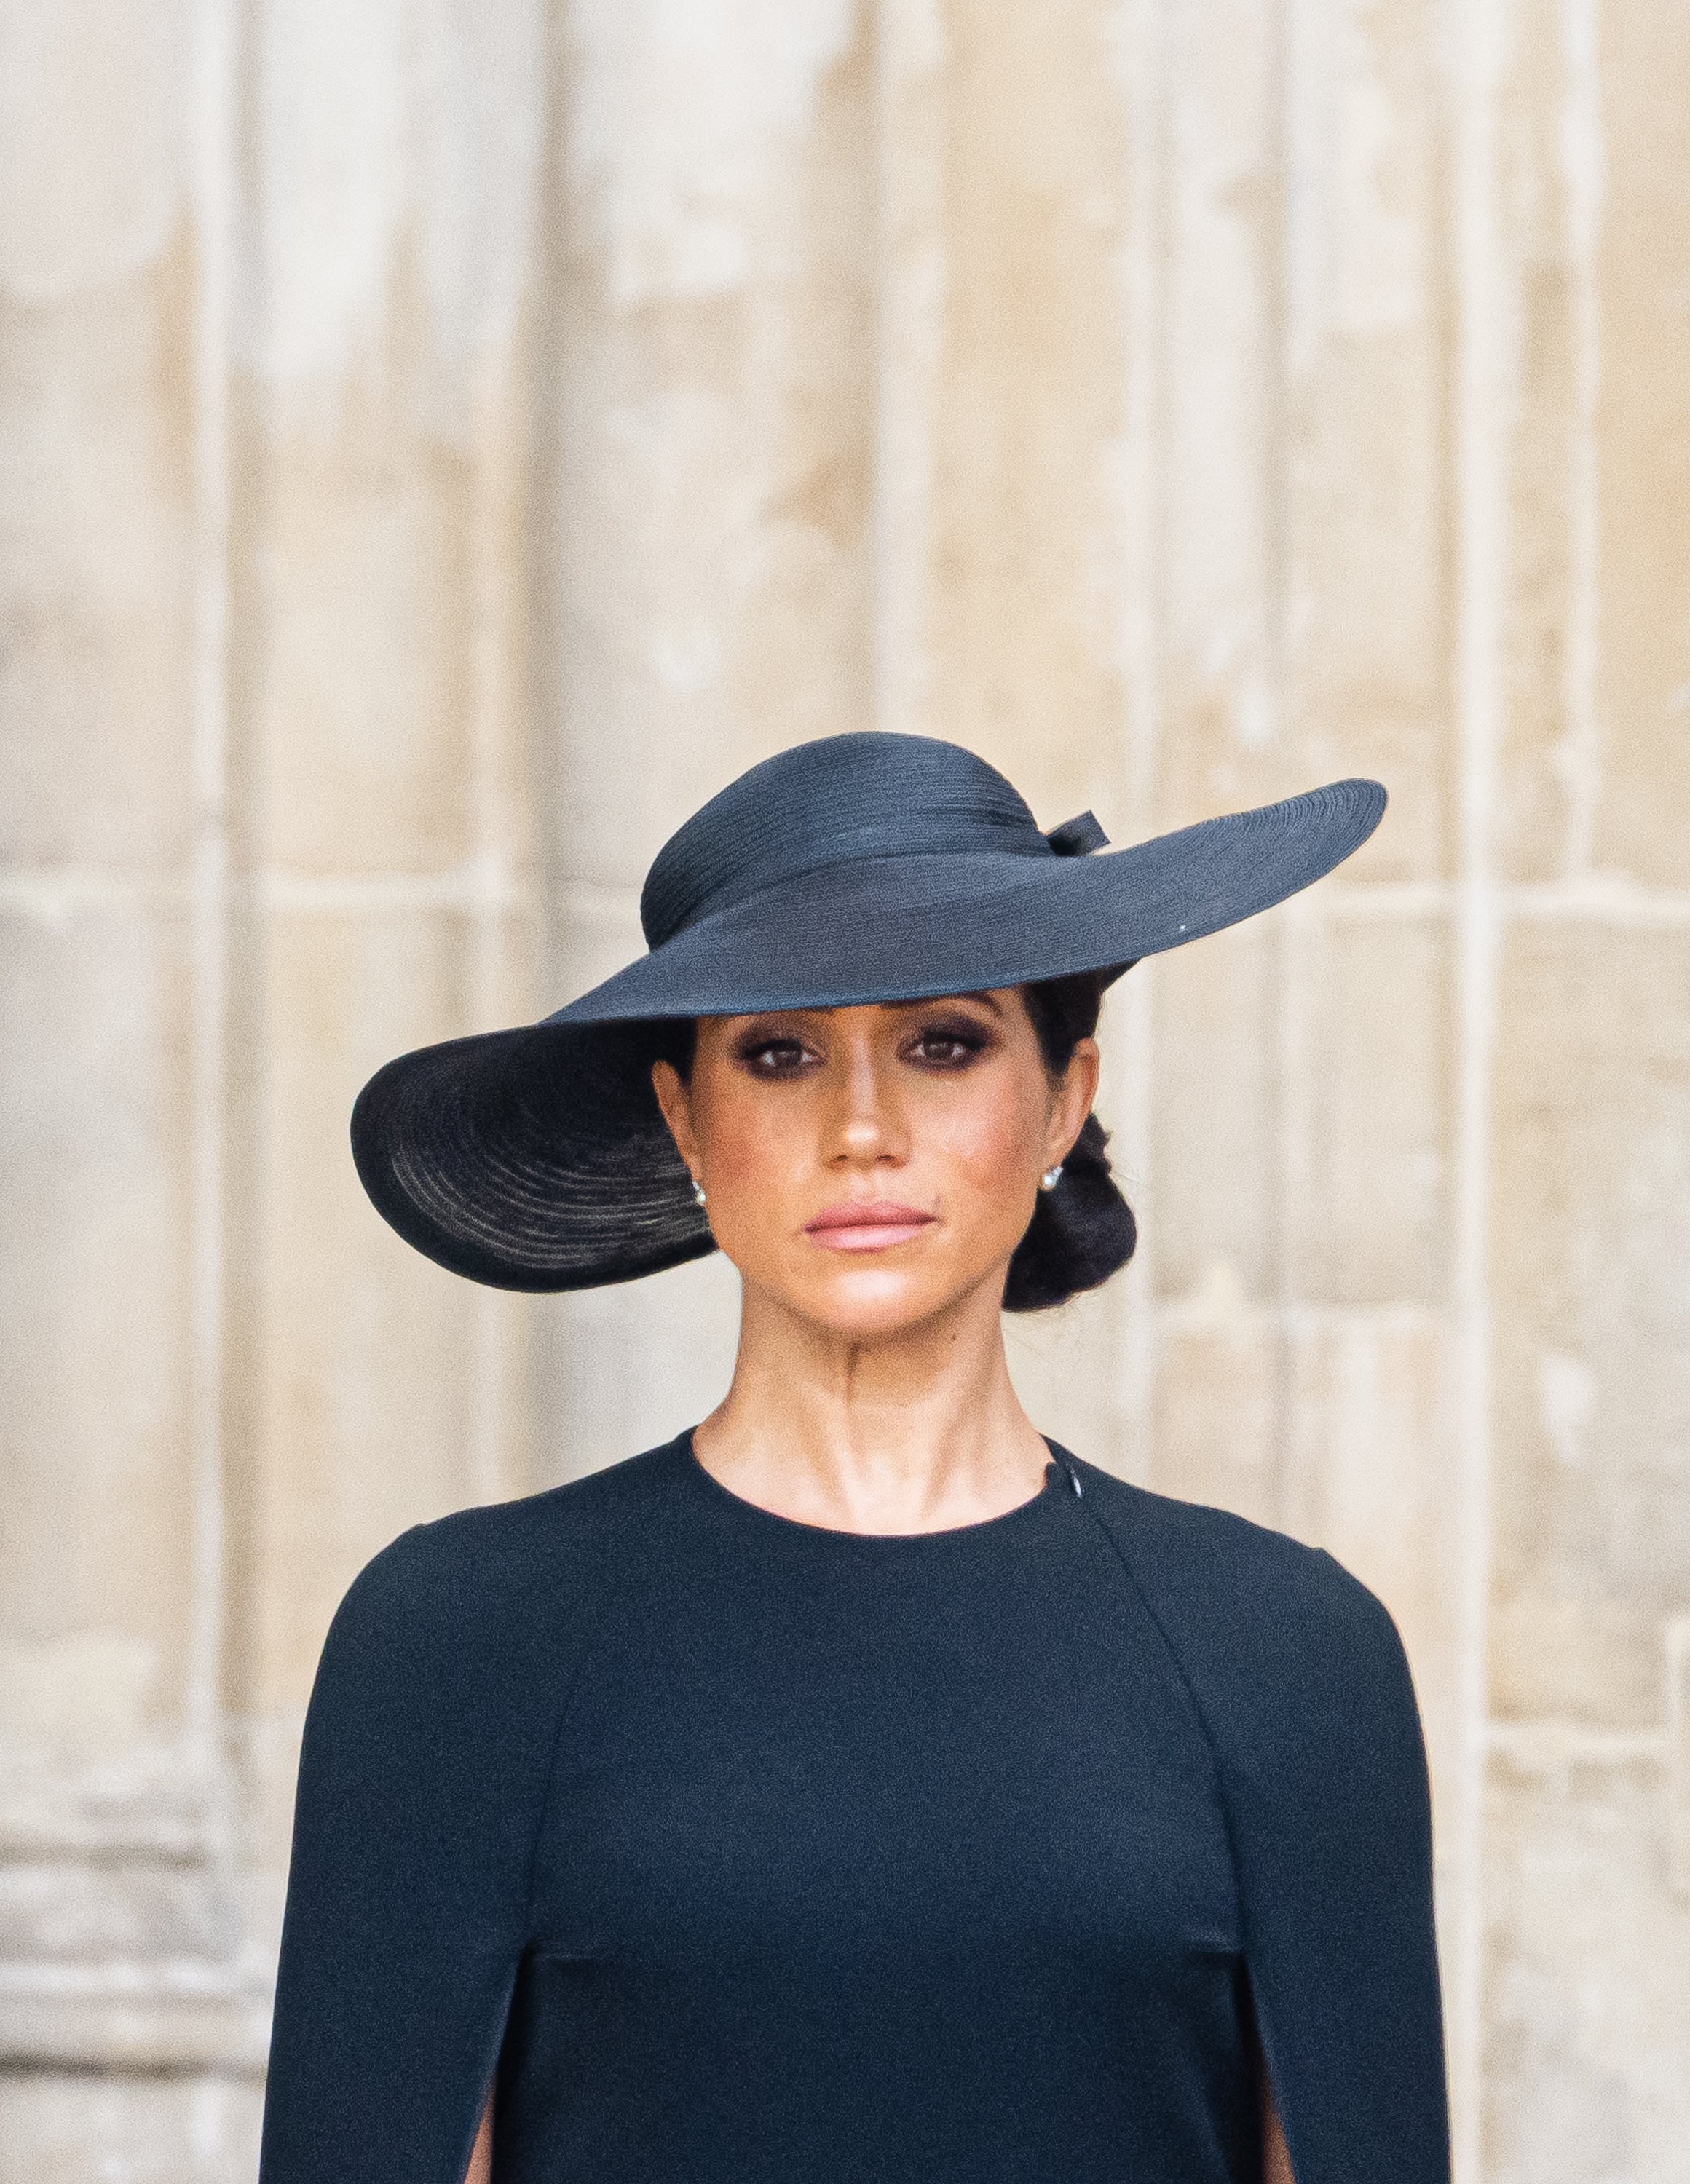 Meghan, Duchess of Sussex during the State Funeral of Queen Elizabeth II at Westminster Abbey on September 19, 2022 in London, England | Source: Getty Images